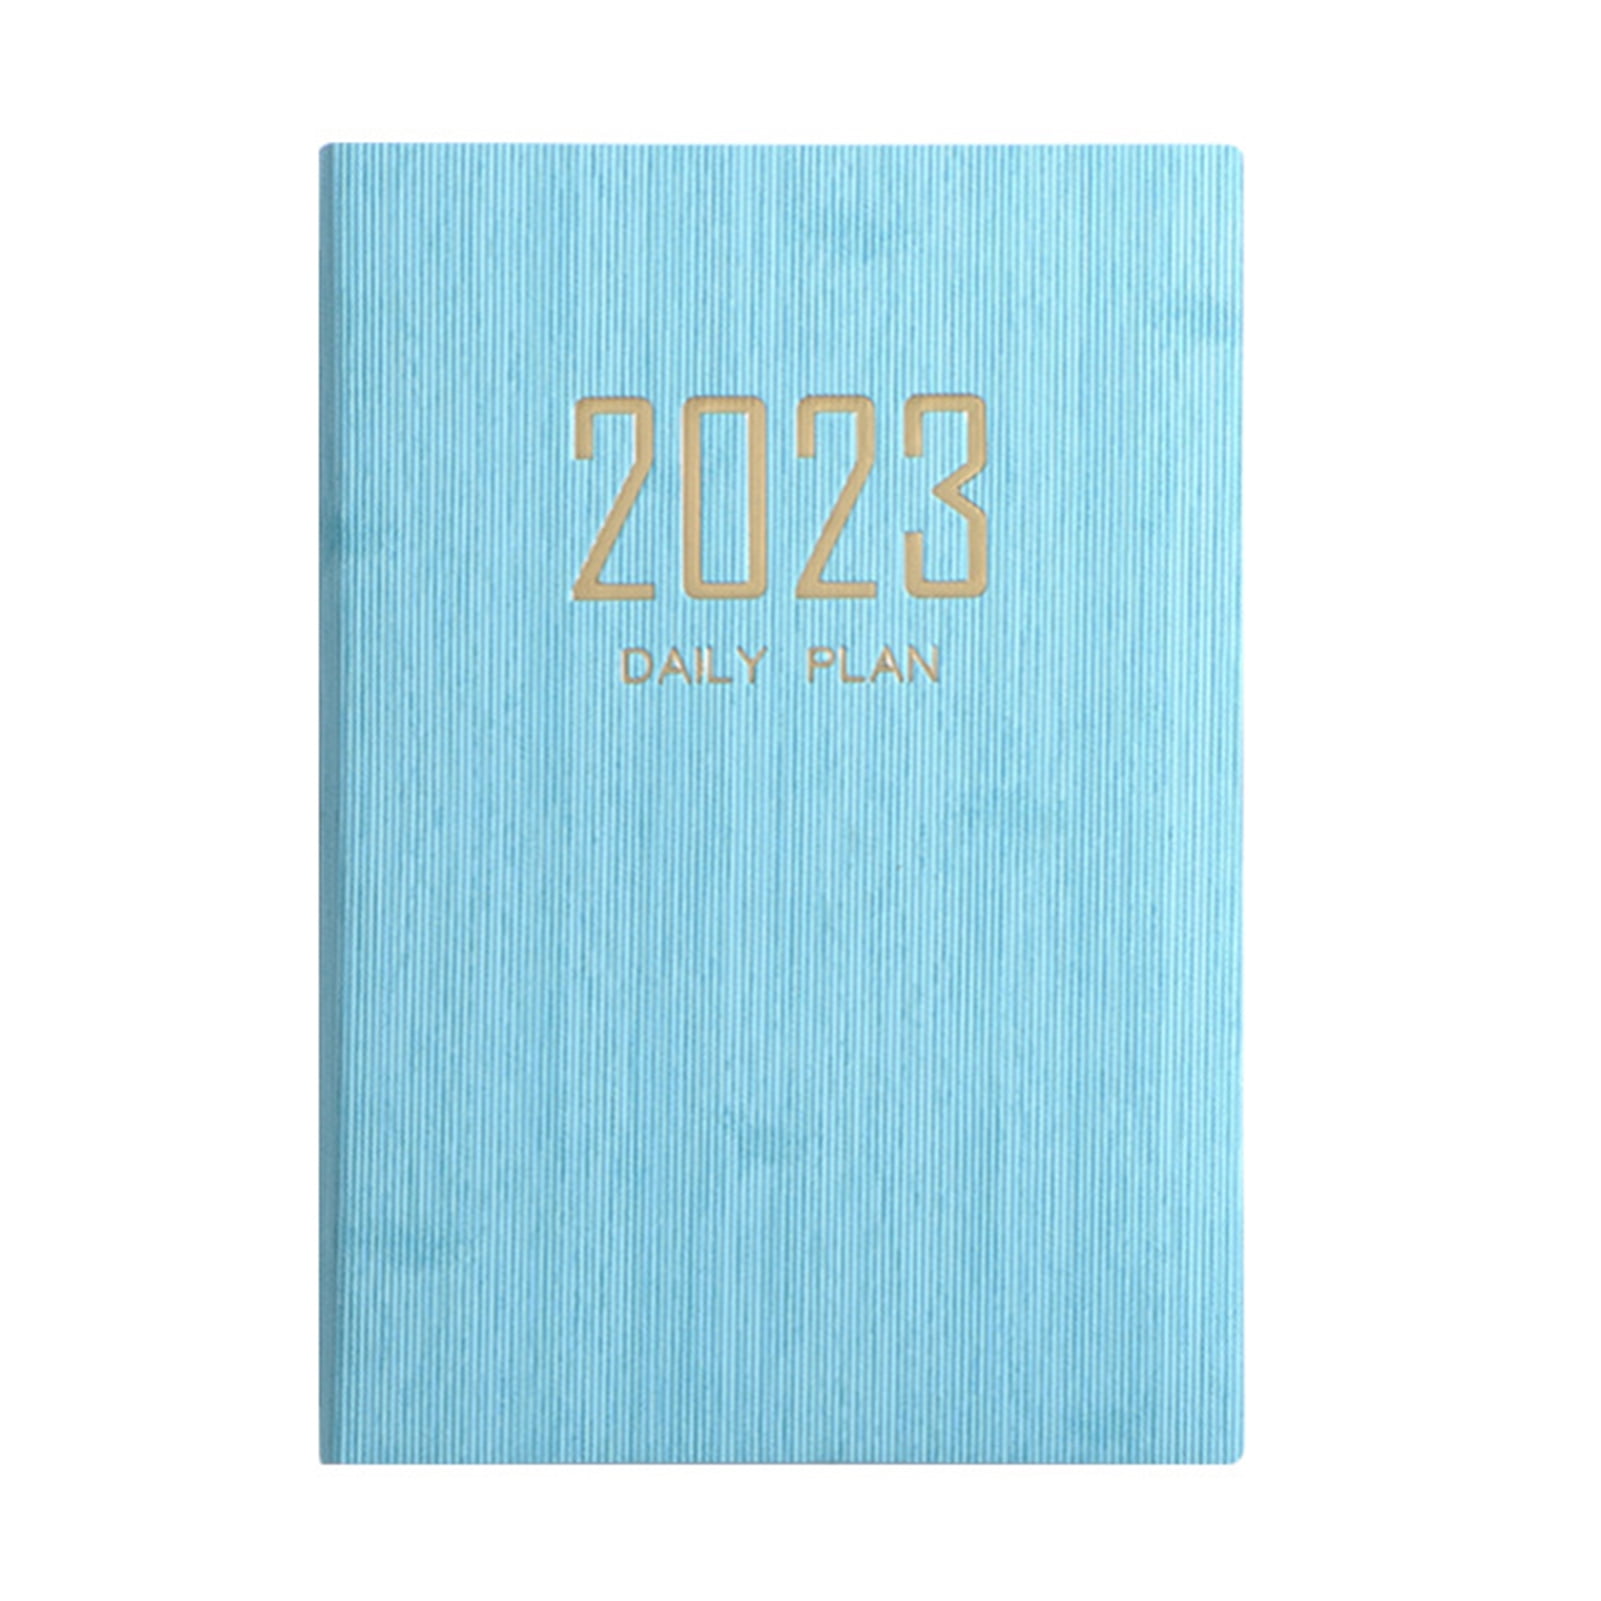 ActFu Daily Thickened Smooth Writing Faux Leather Cover Agenda 2023 A5 Planner Book for Student - Walmart.com